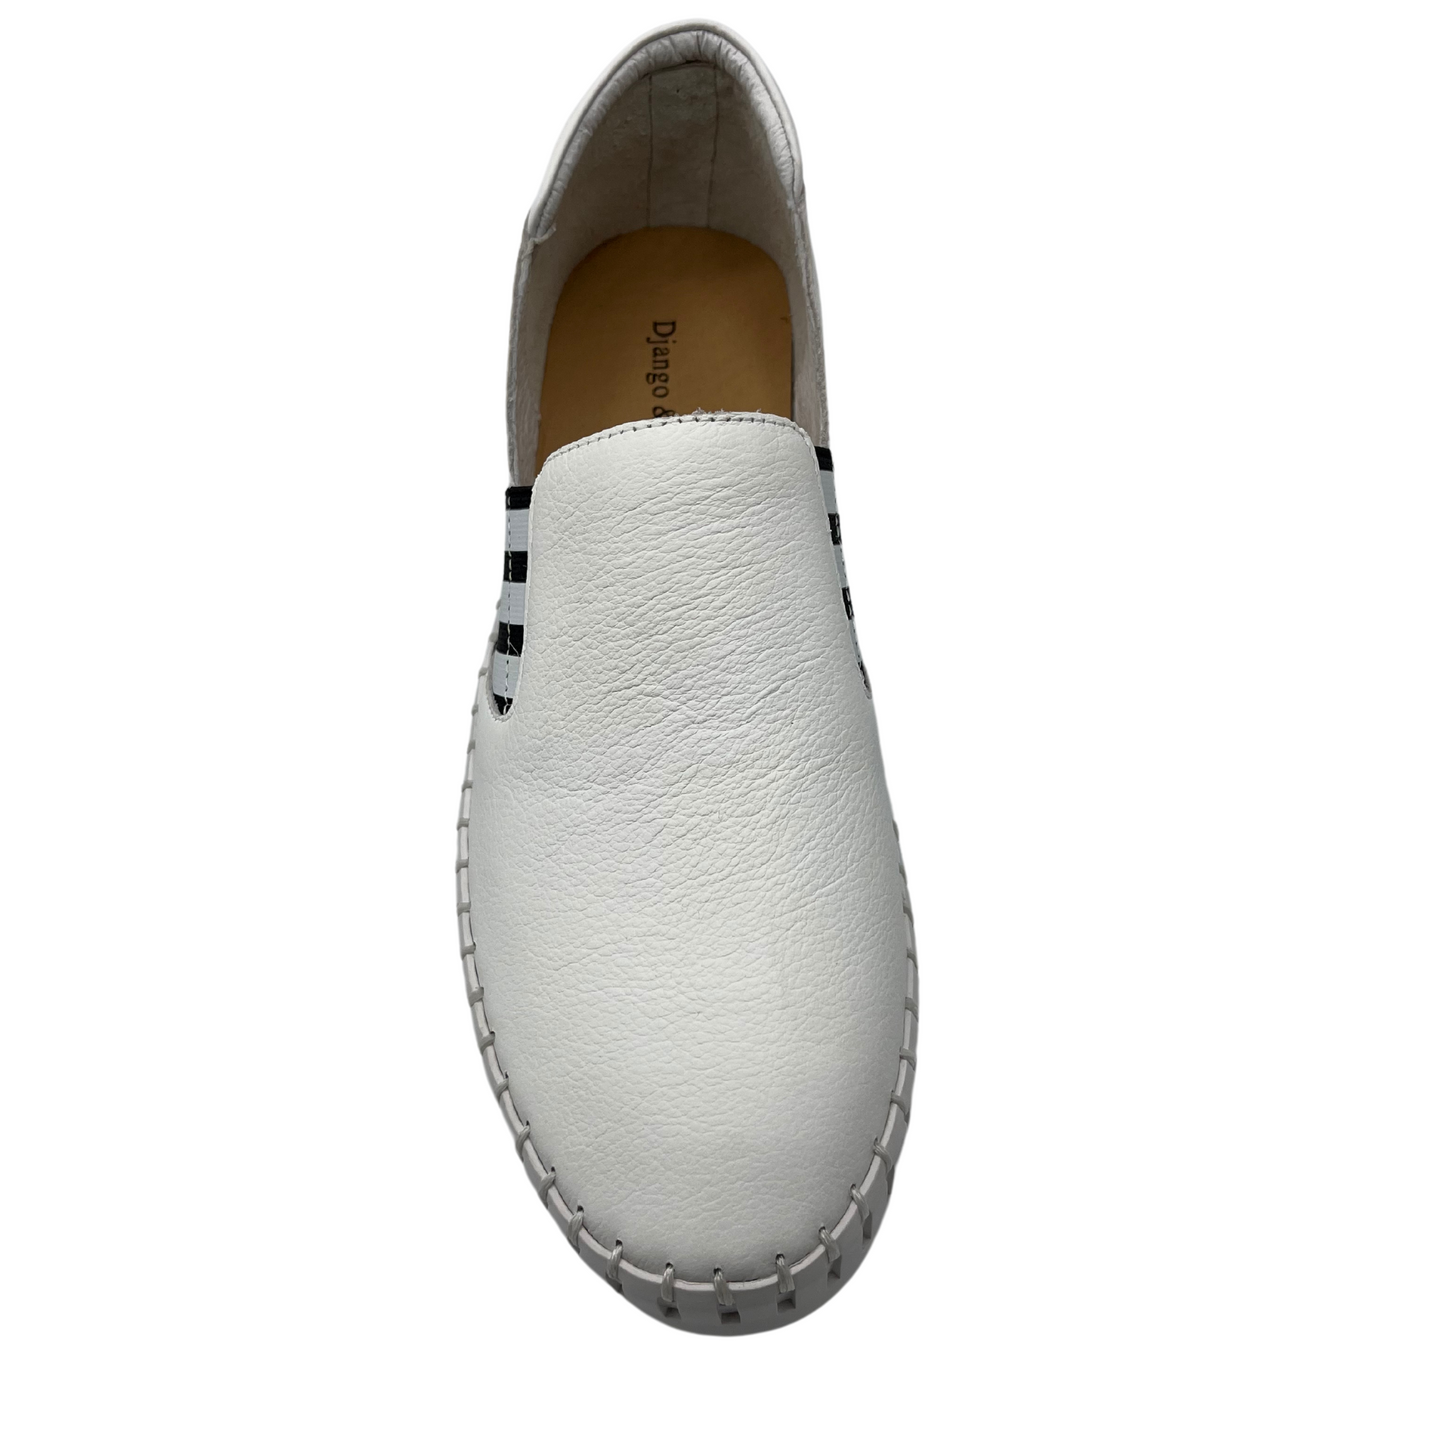 Top view of white leather slip on shoe with leather lining and rounded toe